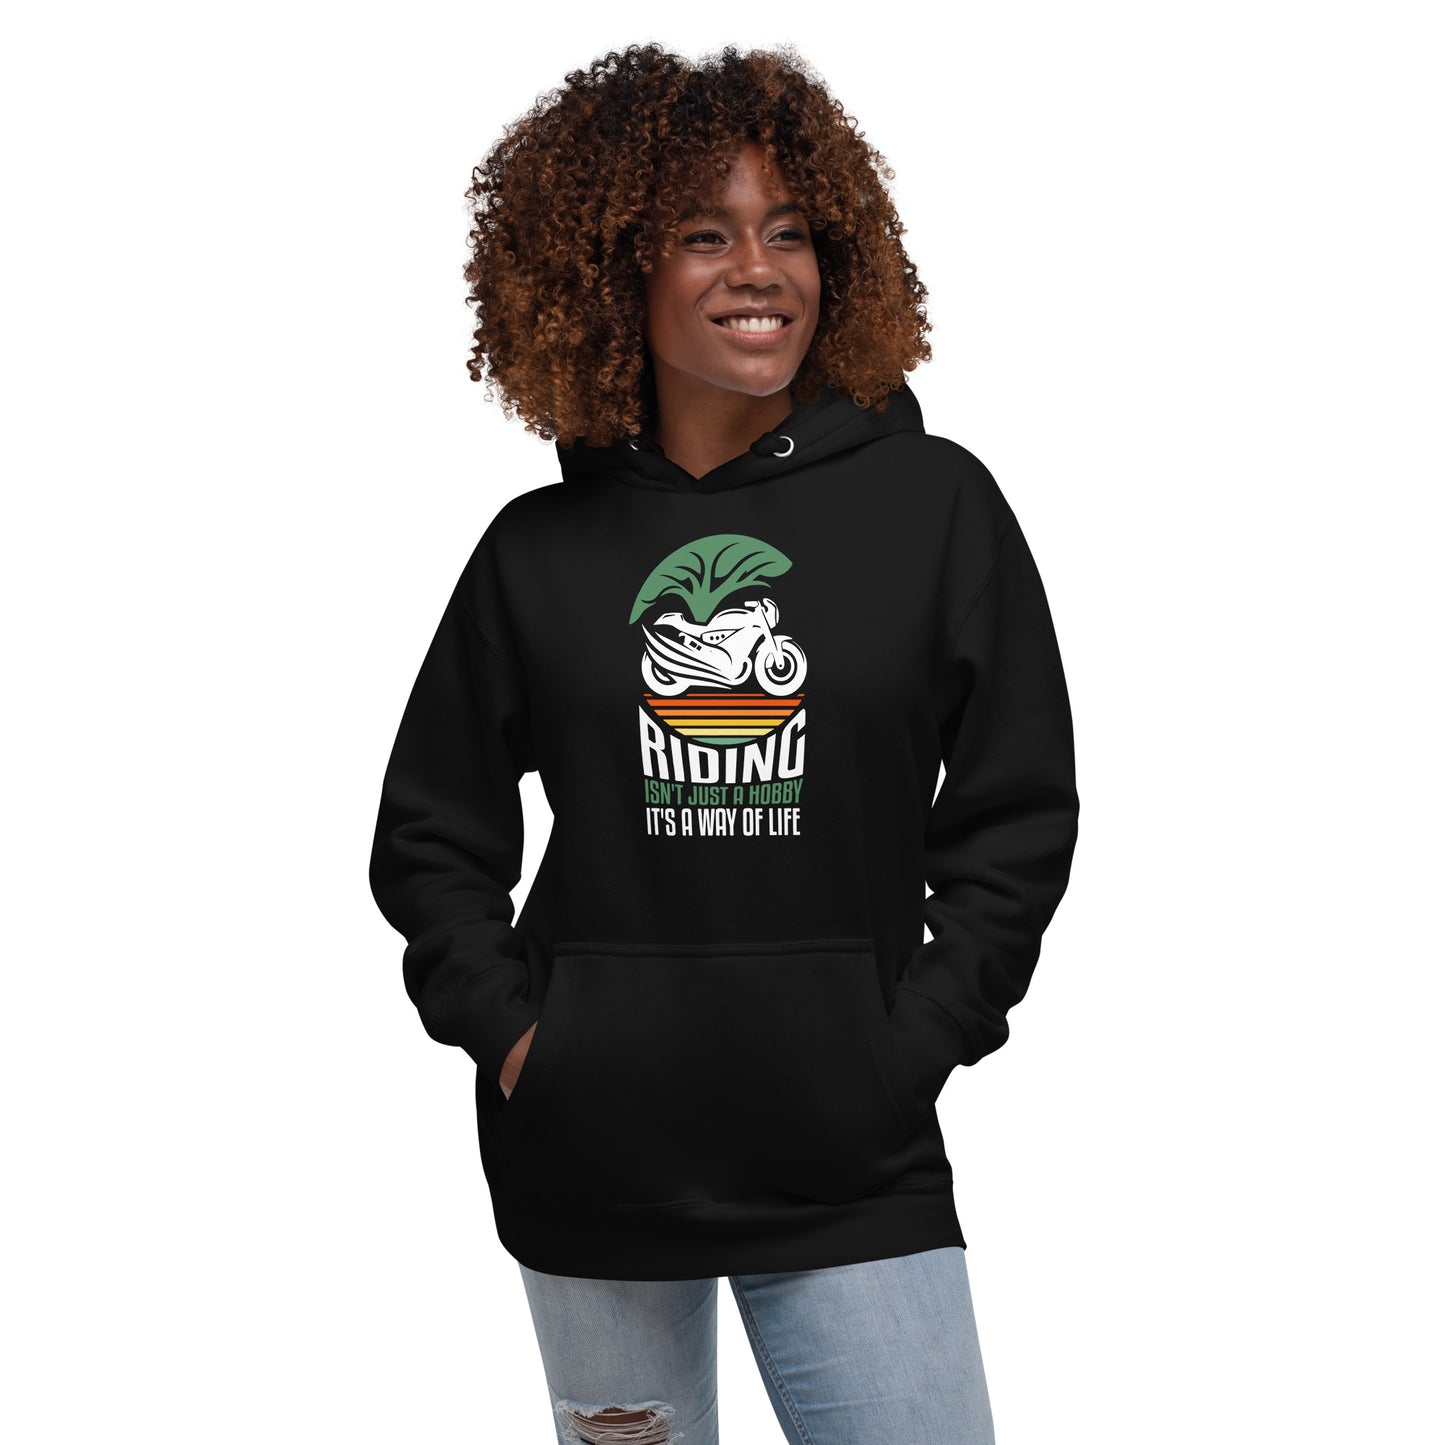 Riding isn't just a Hobby, it's a way of Life Hoodie